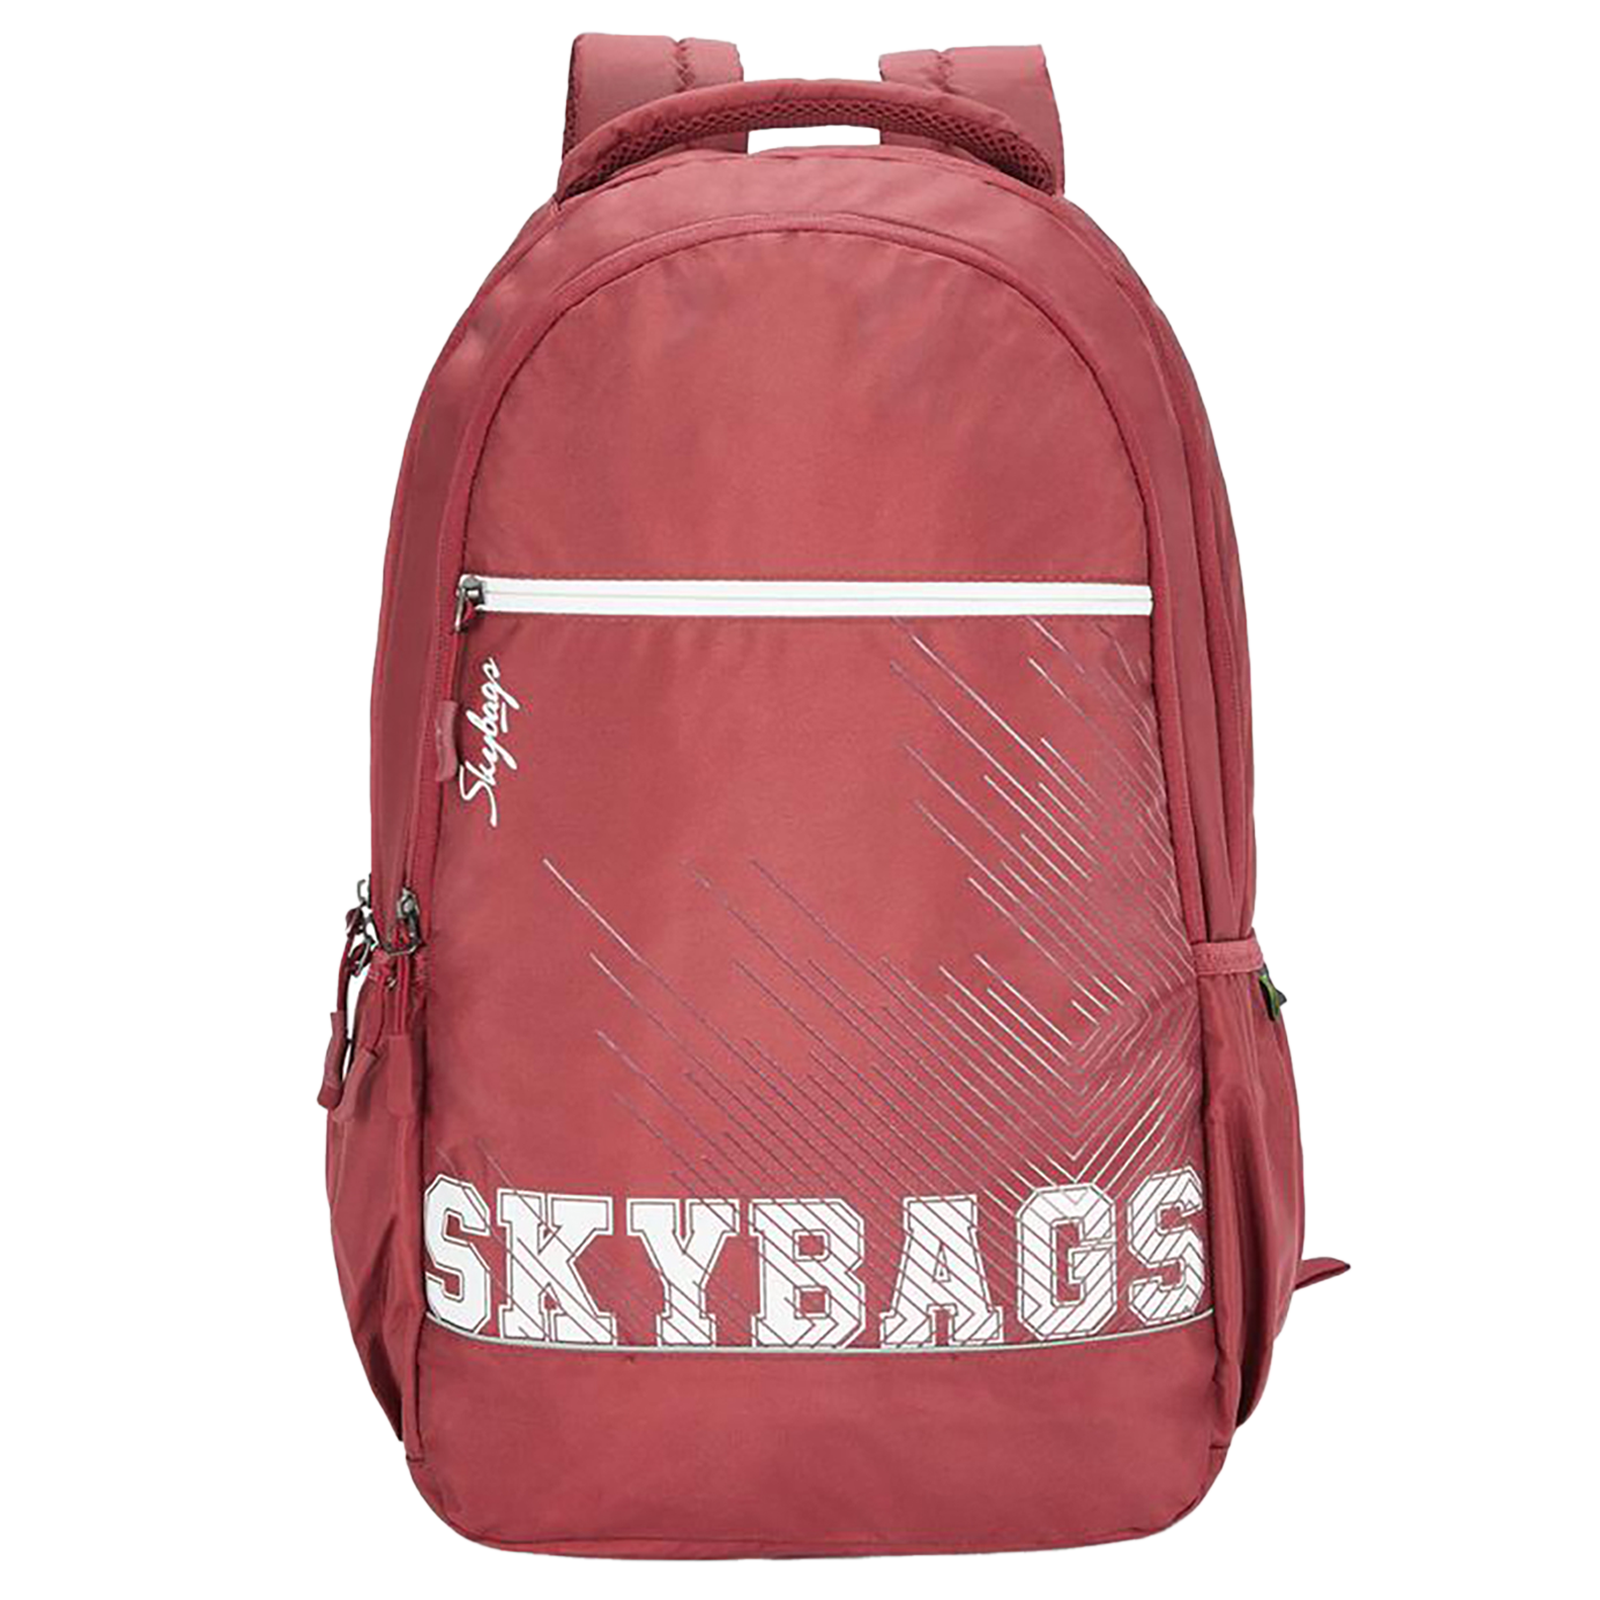 Sky Bags Campus Plus 01 30 Litres Gucci Fabric Backpack for 17 Inch Laptop (Water Resistant, LPBPCAP1RED, Red)_1